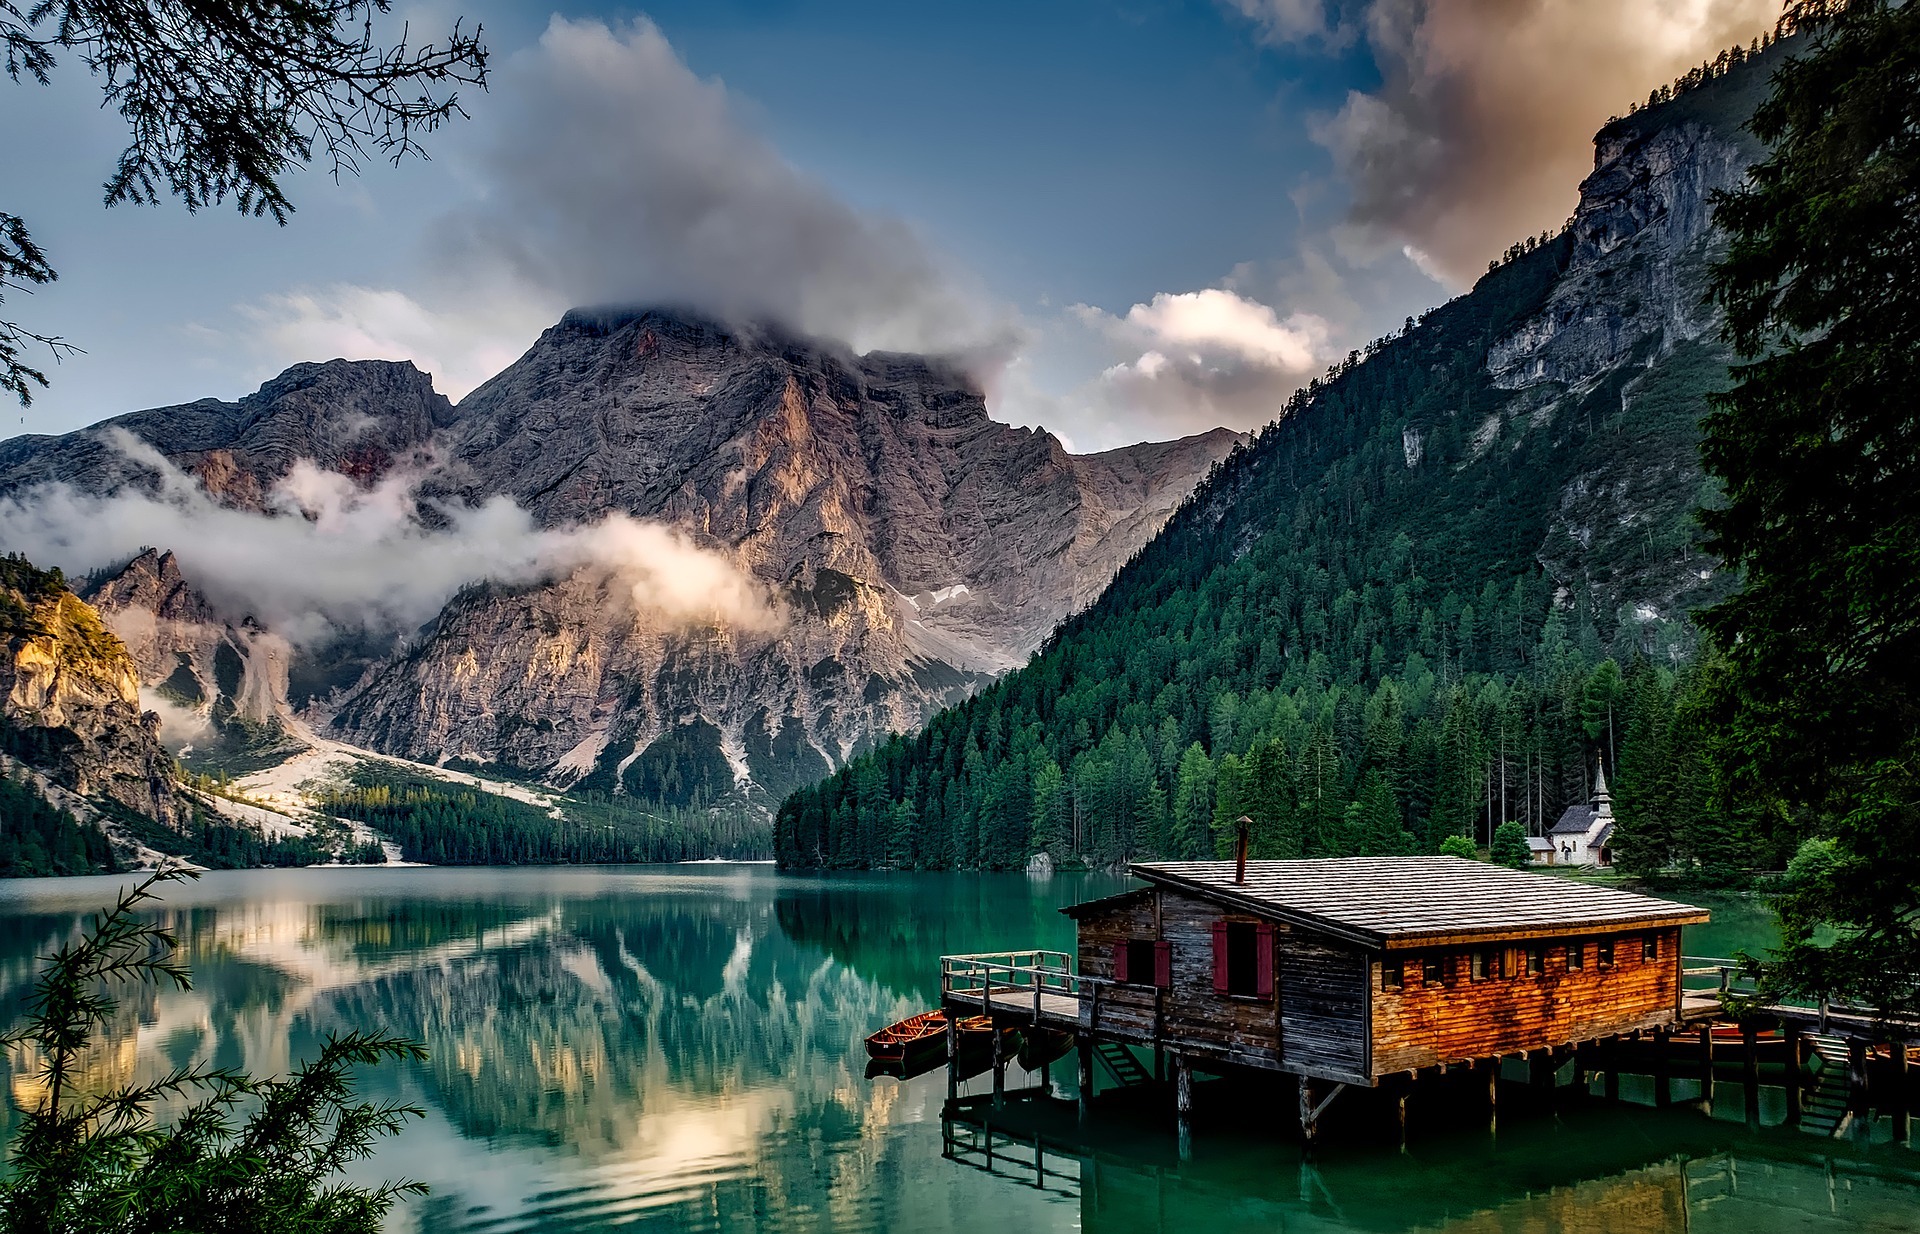 Lake Prags is a lake in the Prags Dolomites in South Tyrol, Italy